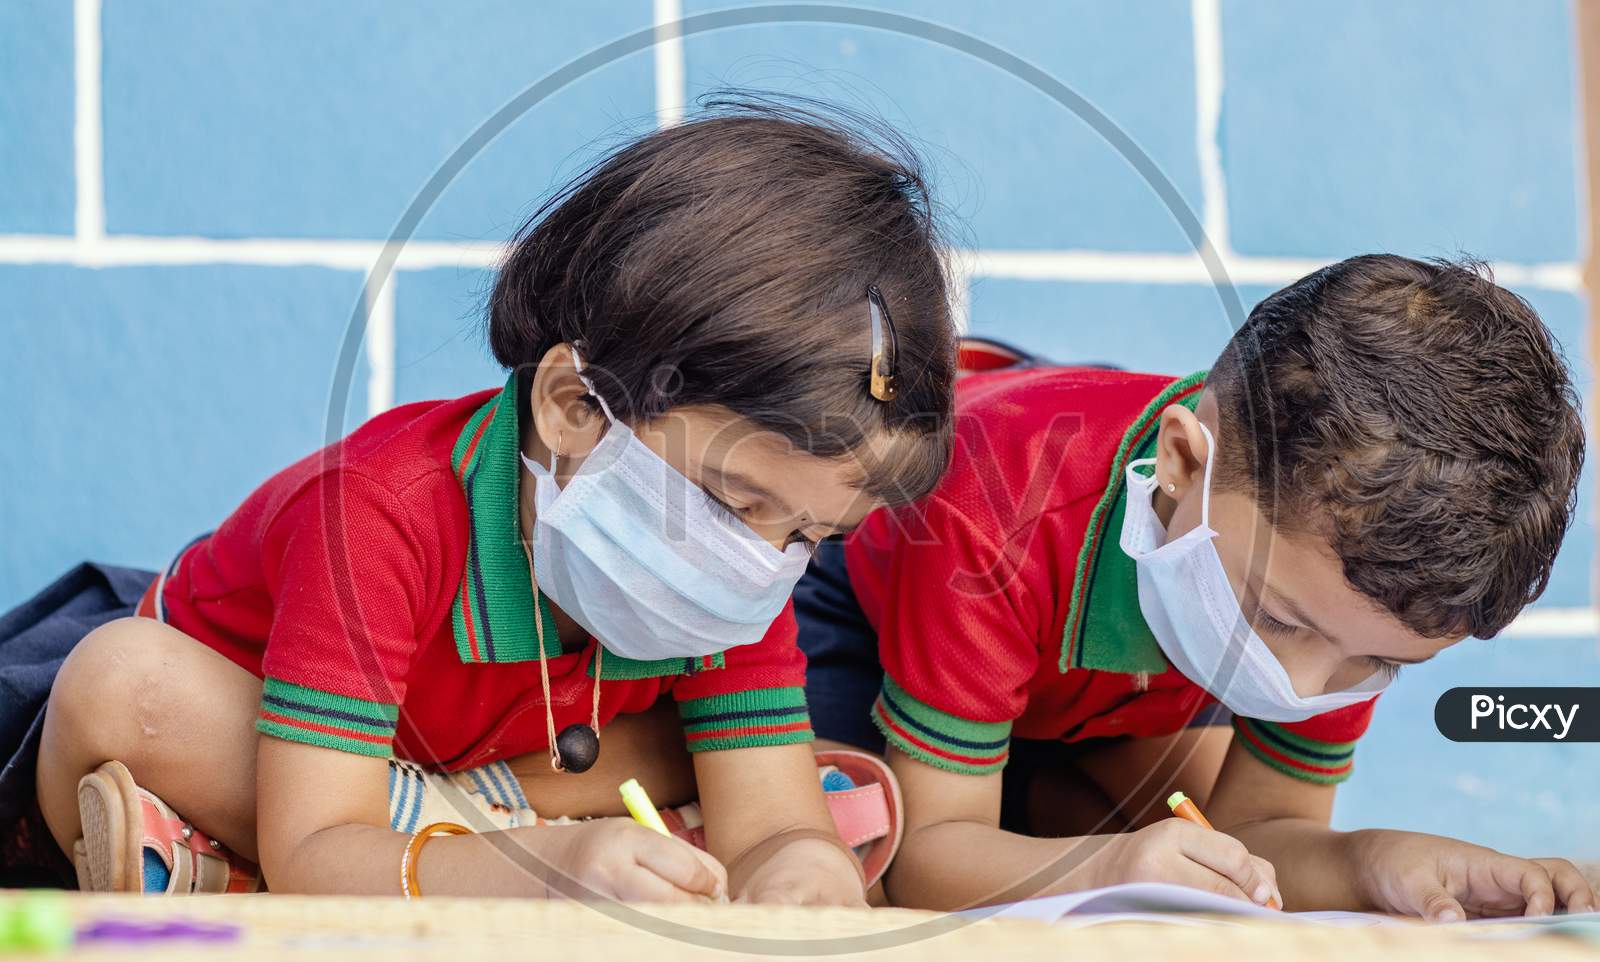 Kids Busy In Writing With Medical Face Mask Wearing Due To Covid-19 Or Coronavirus Outbreak Or Pandemic At School - Children Painting At Home During Lockdown.